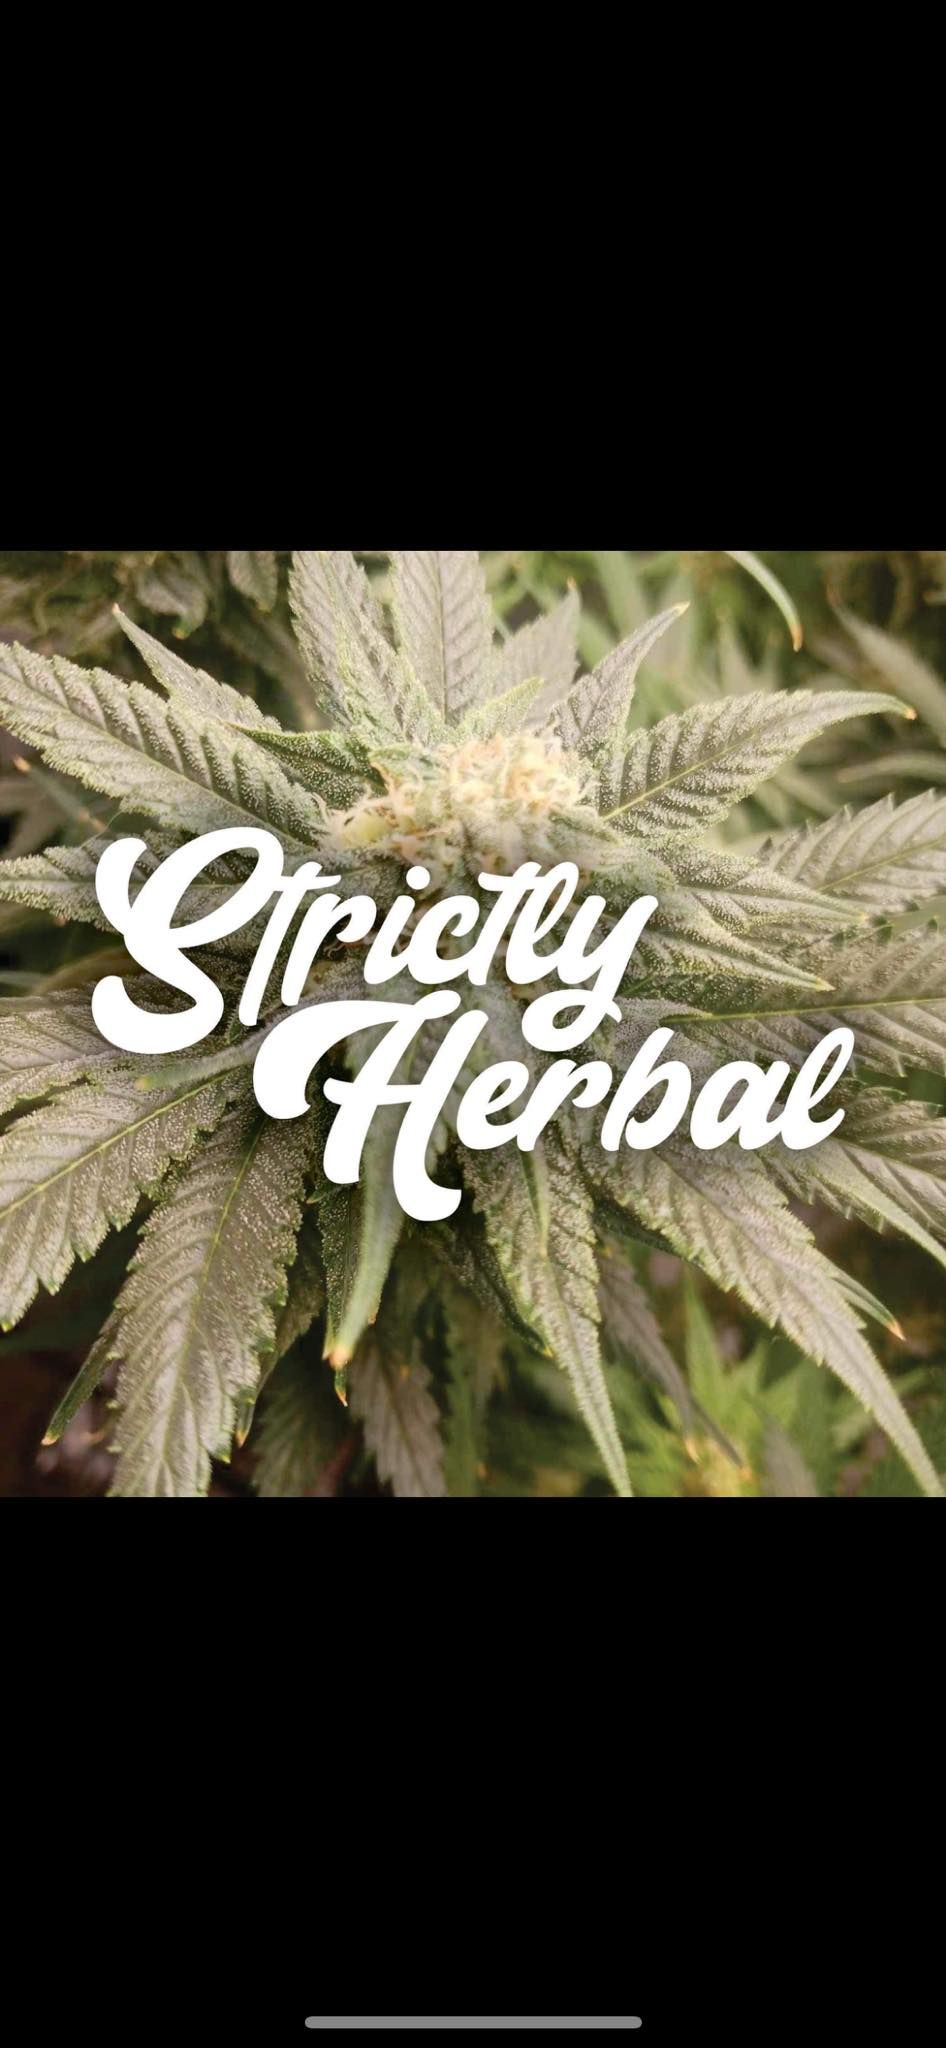 Strictly Herbal at Pillars Pub and Eatery 